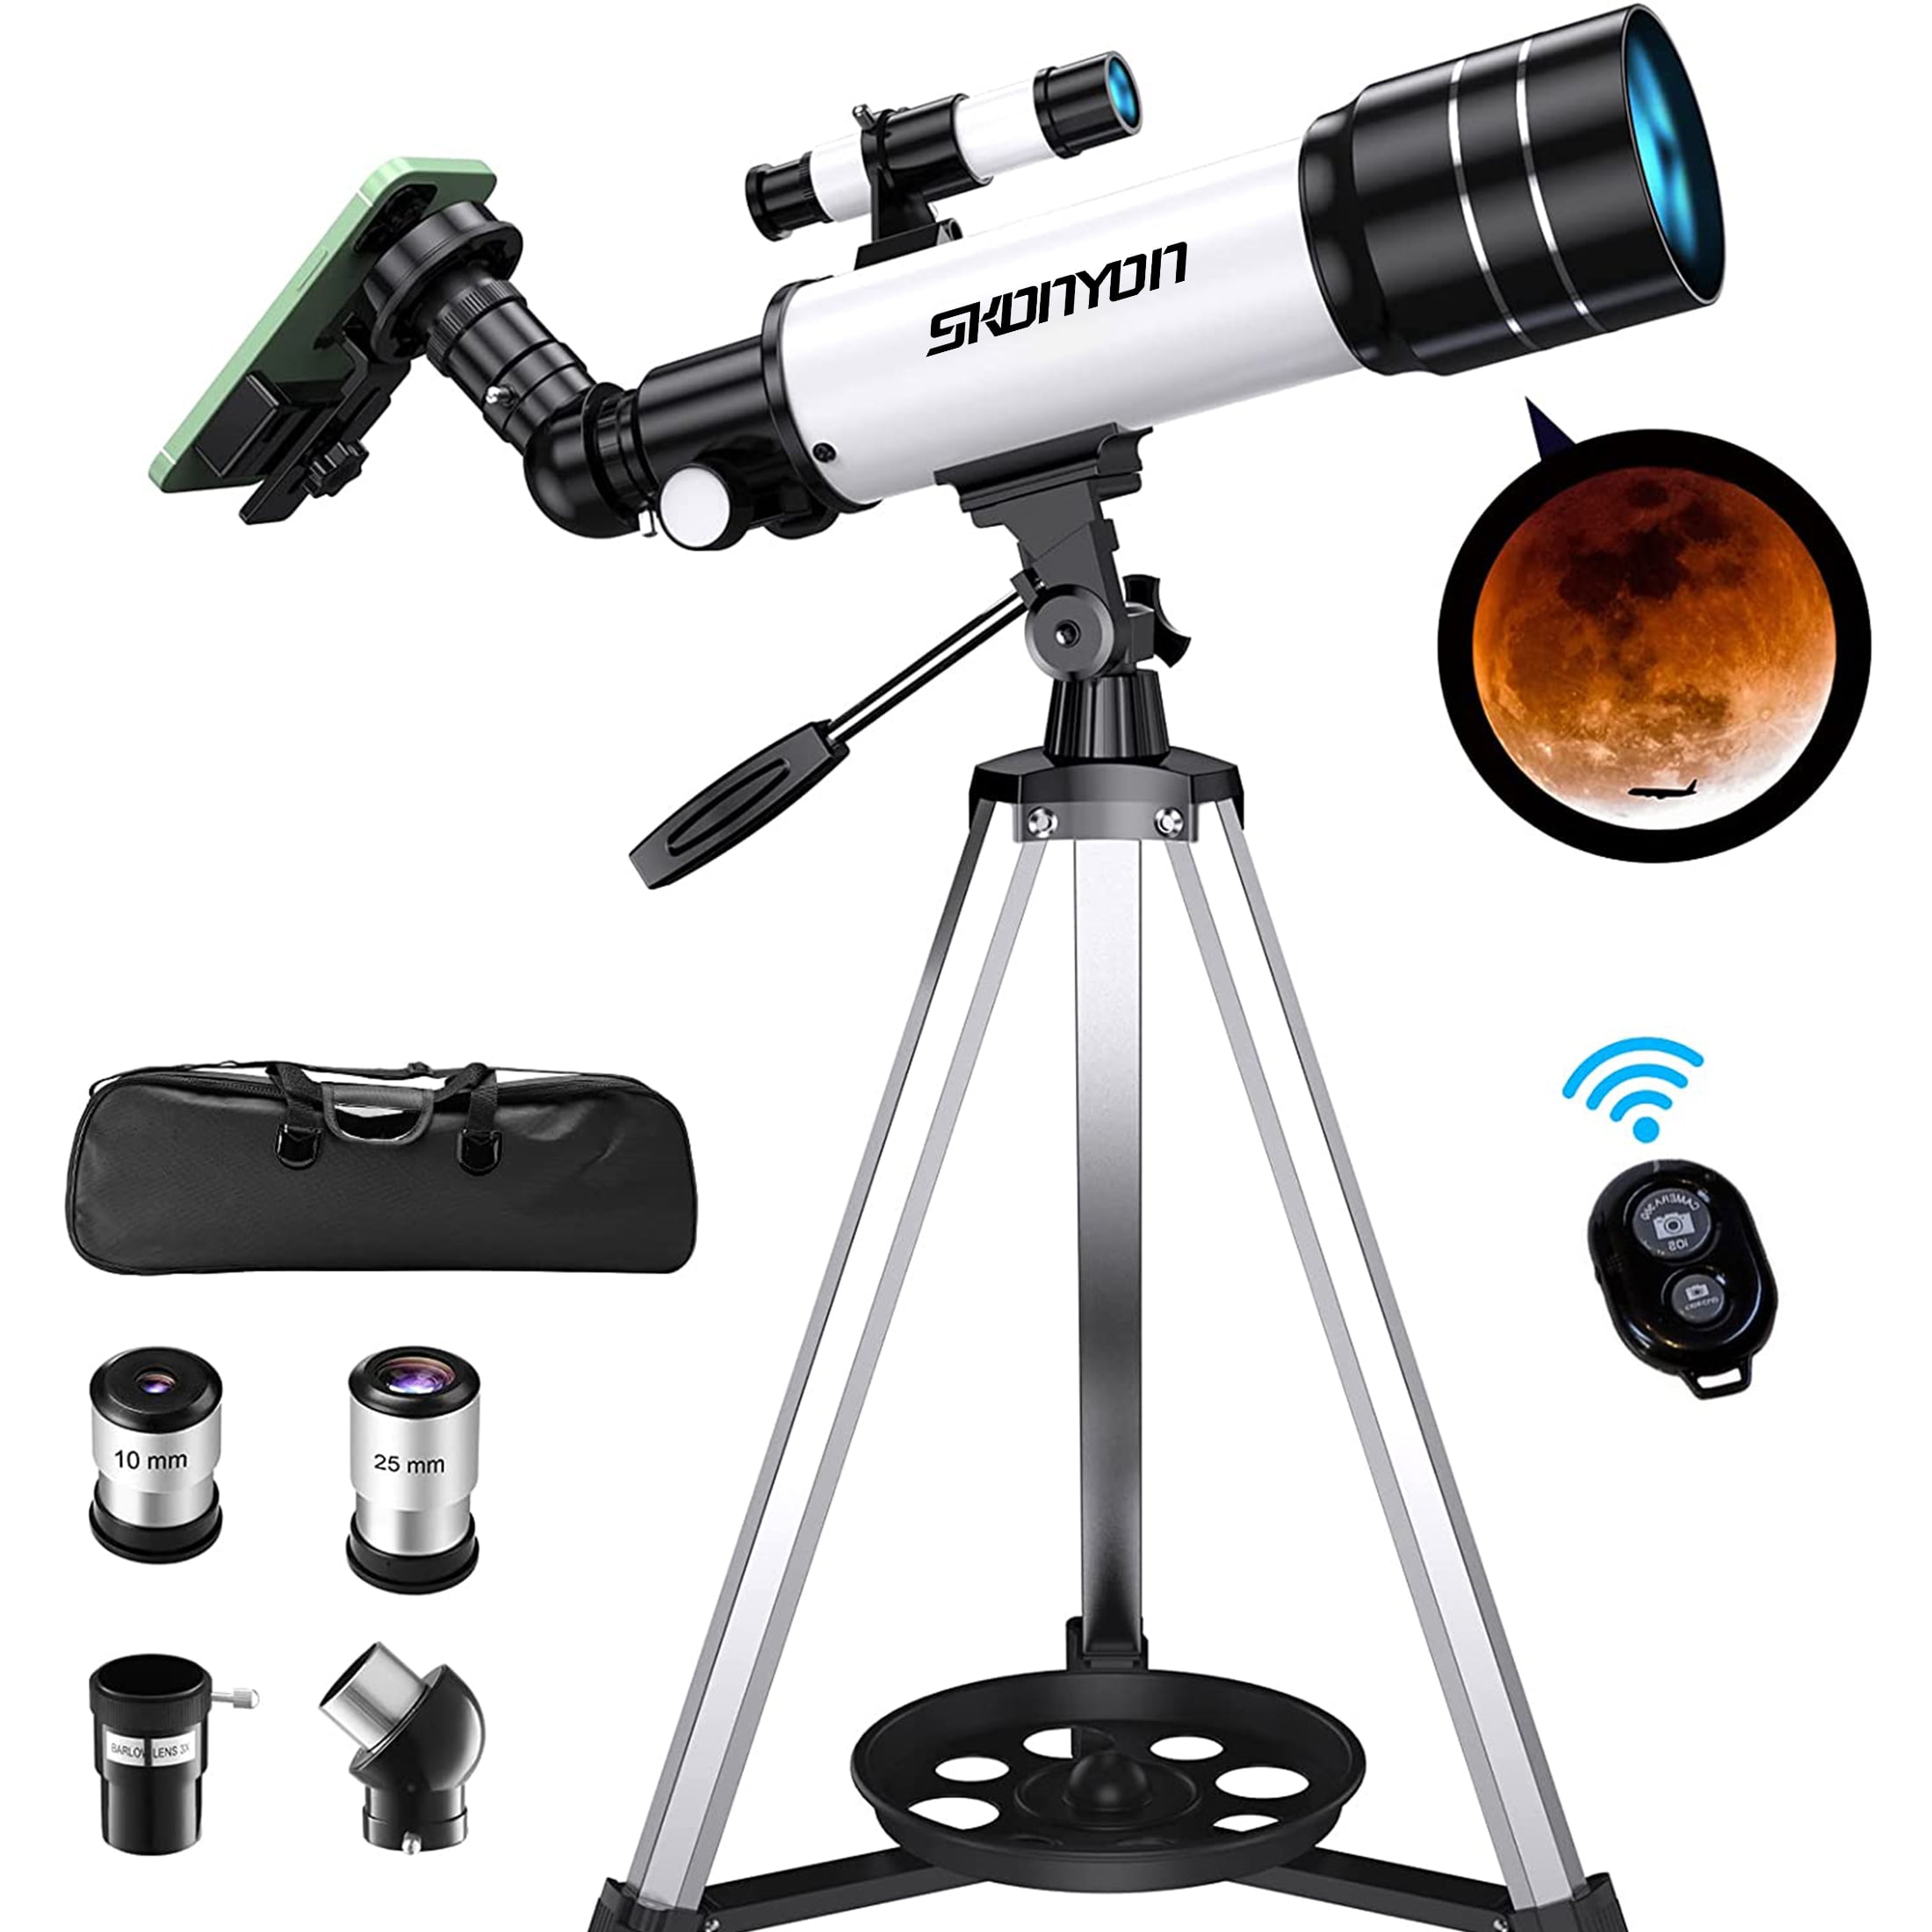 70mm Aperture 400mm Astronomical Refractor Telescope Portable Telescope with Tripod & Finder Scope Ideal Telescope for Beginners Good Gift for Moon Viewing Coerni Telescopes for Adults Kids 